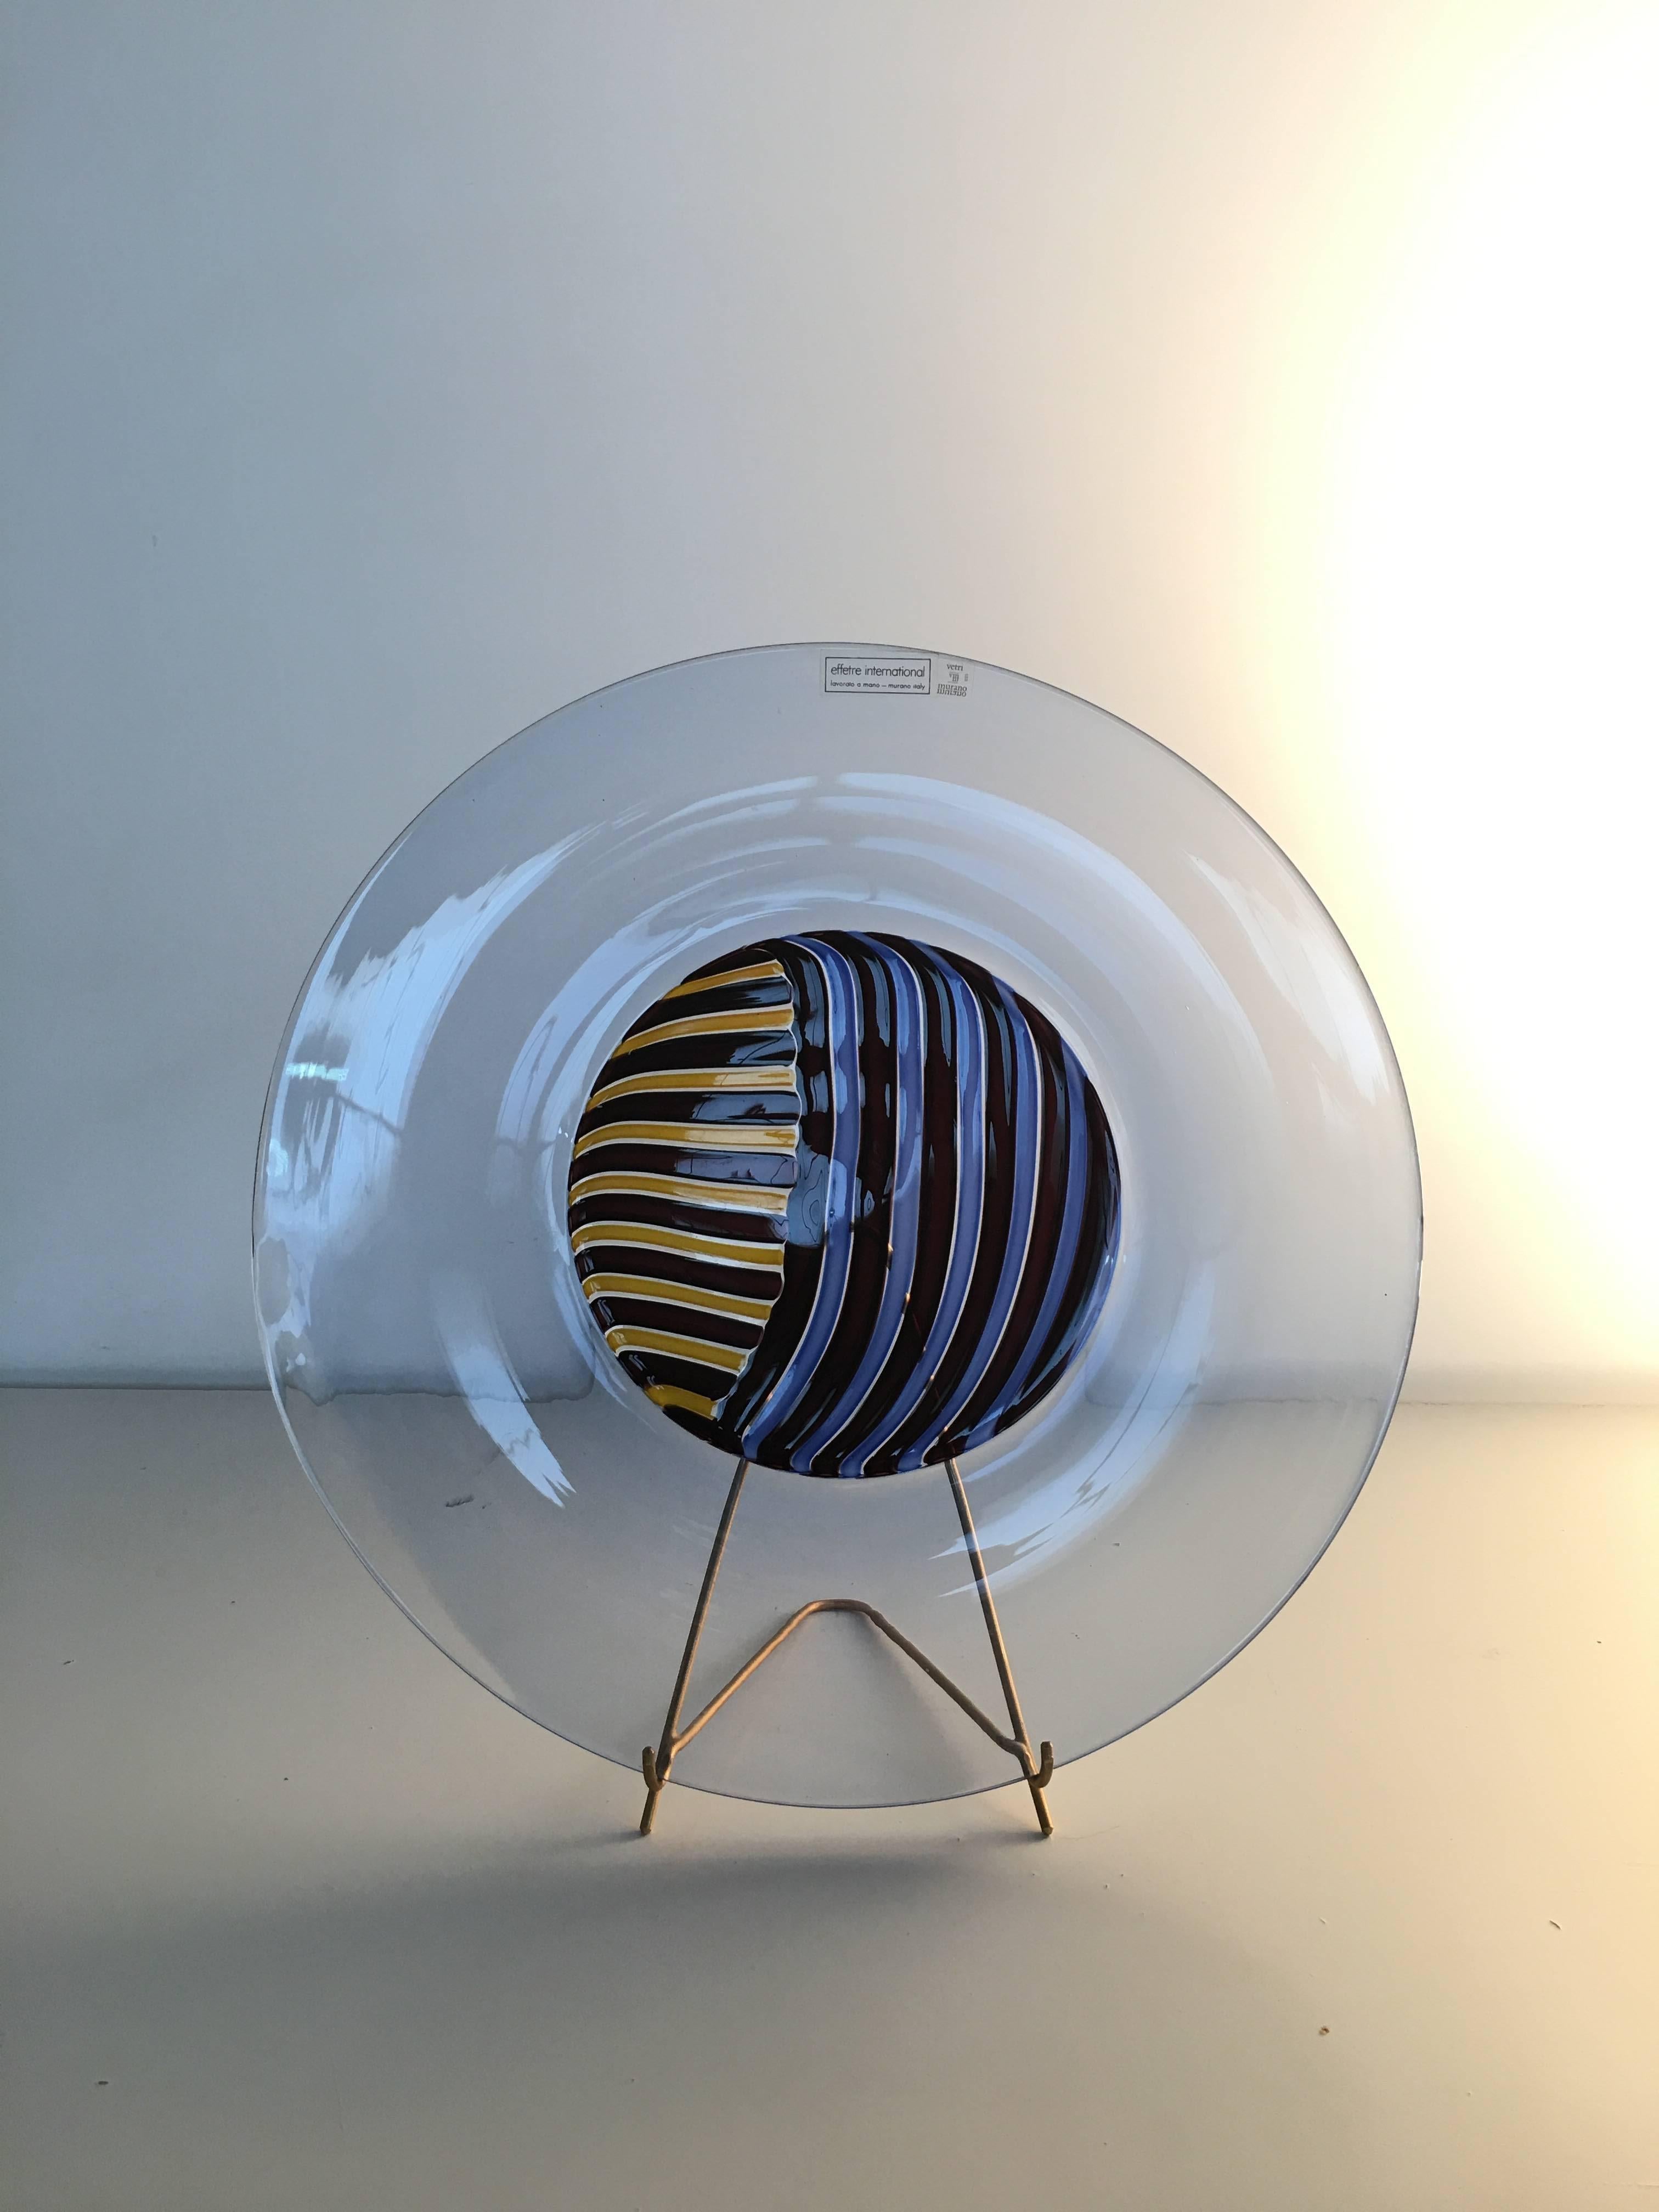 Attributed to Lino Tagliapietra: charger with stand. 1990s production from Effetre. Clear bluino incalmo with piera cane central design. Collector's piece.

Charger/plate, hand opened with central part made up of two-tone piera canes and incalmo